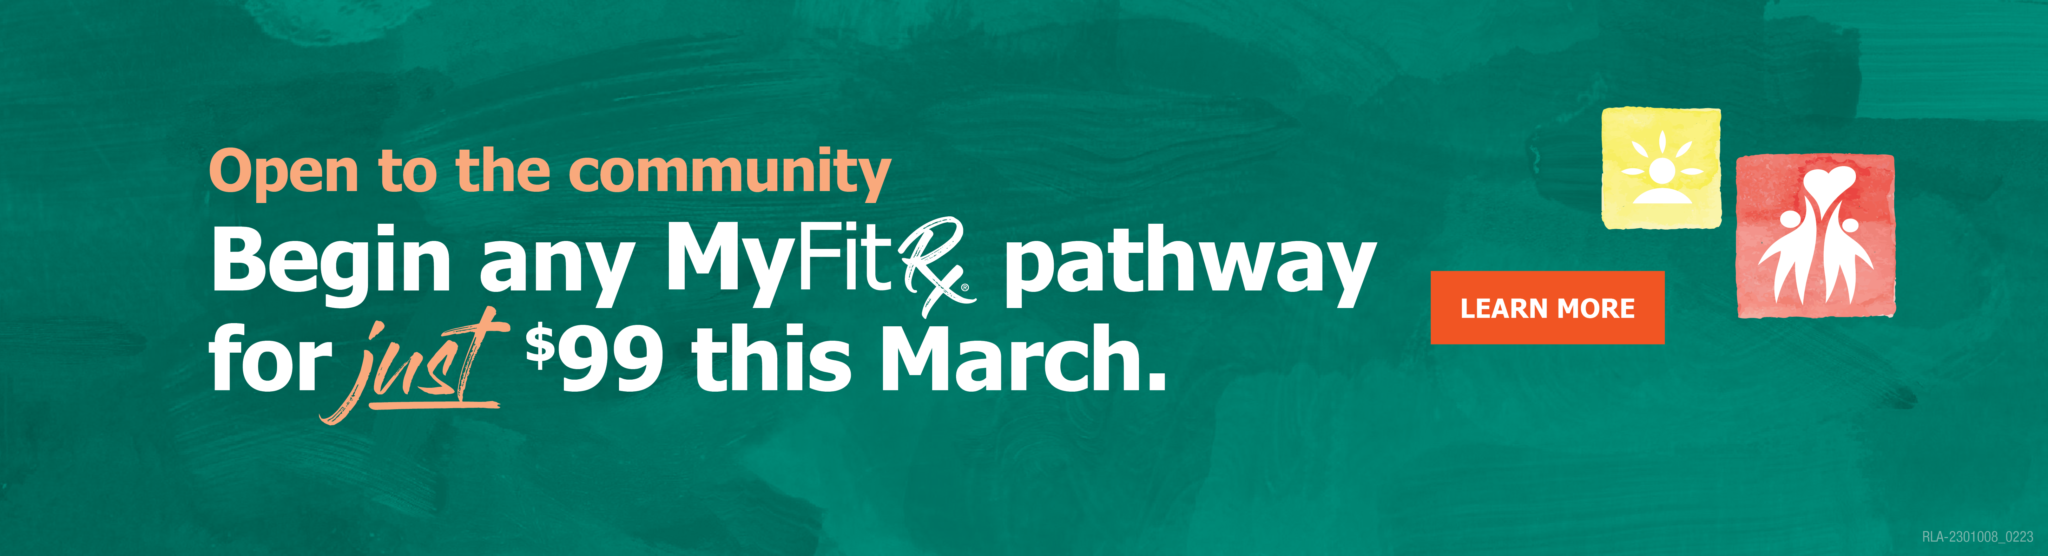 Begin any MyFitRx® pathway for just $99 this March.